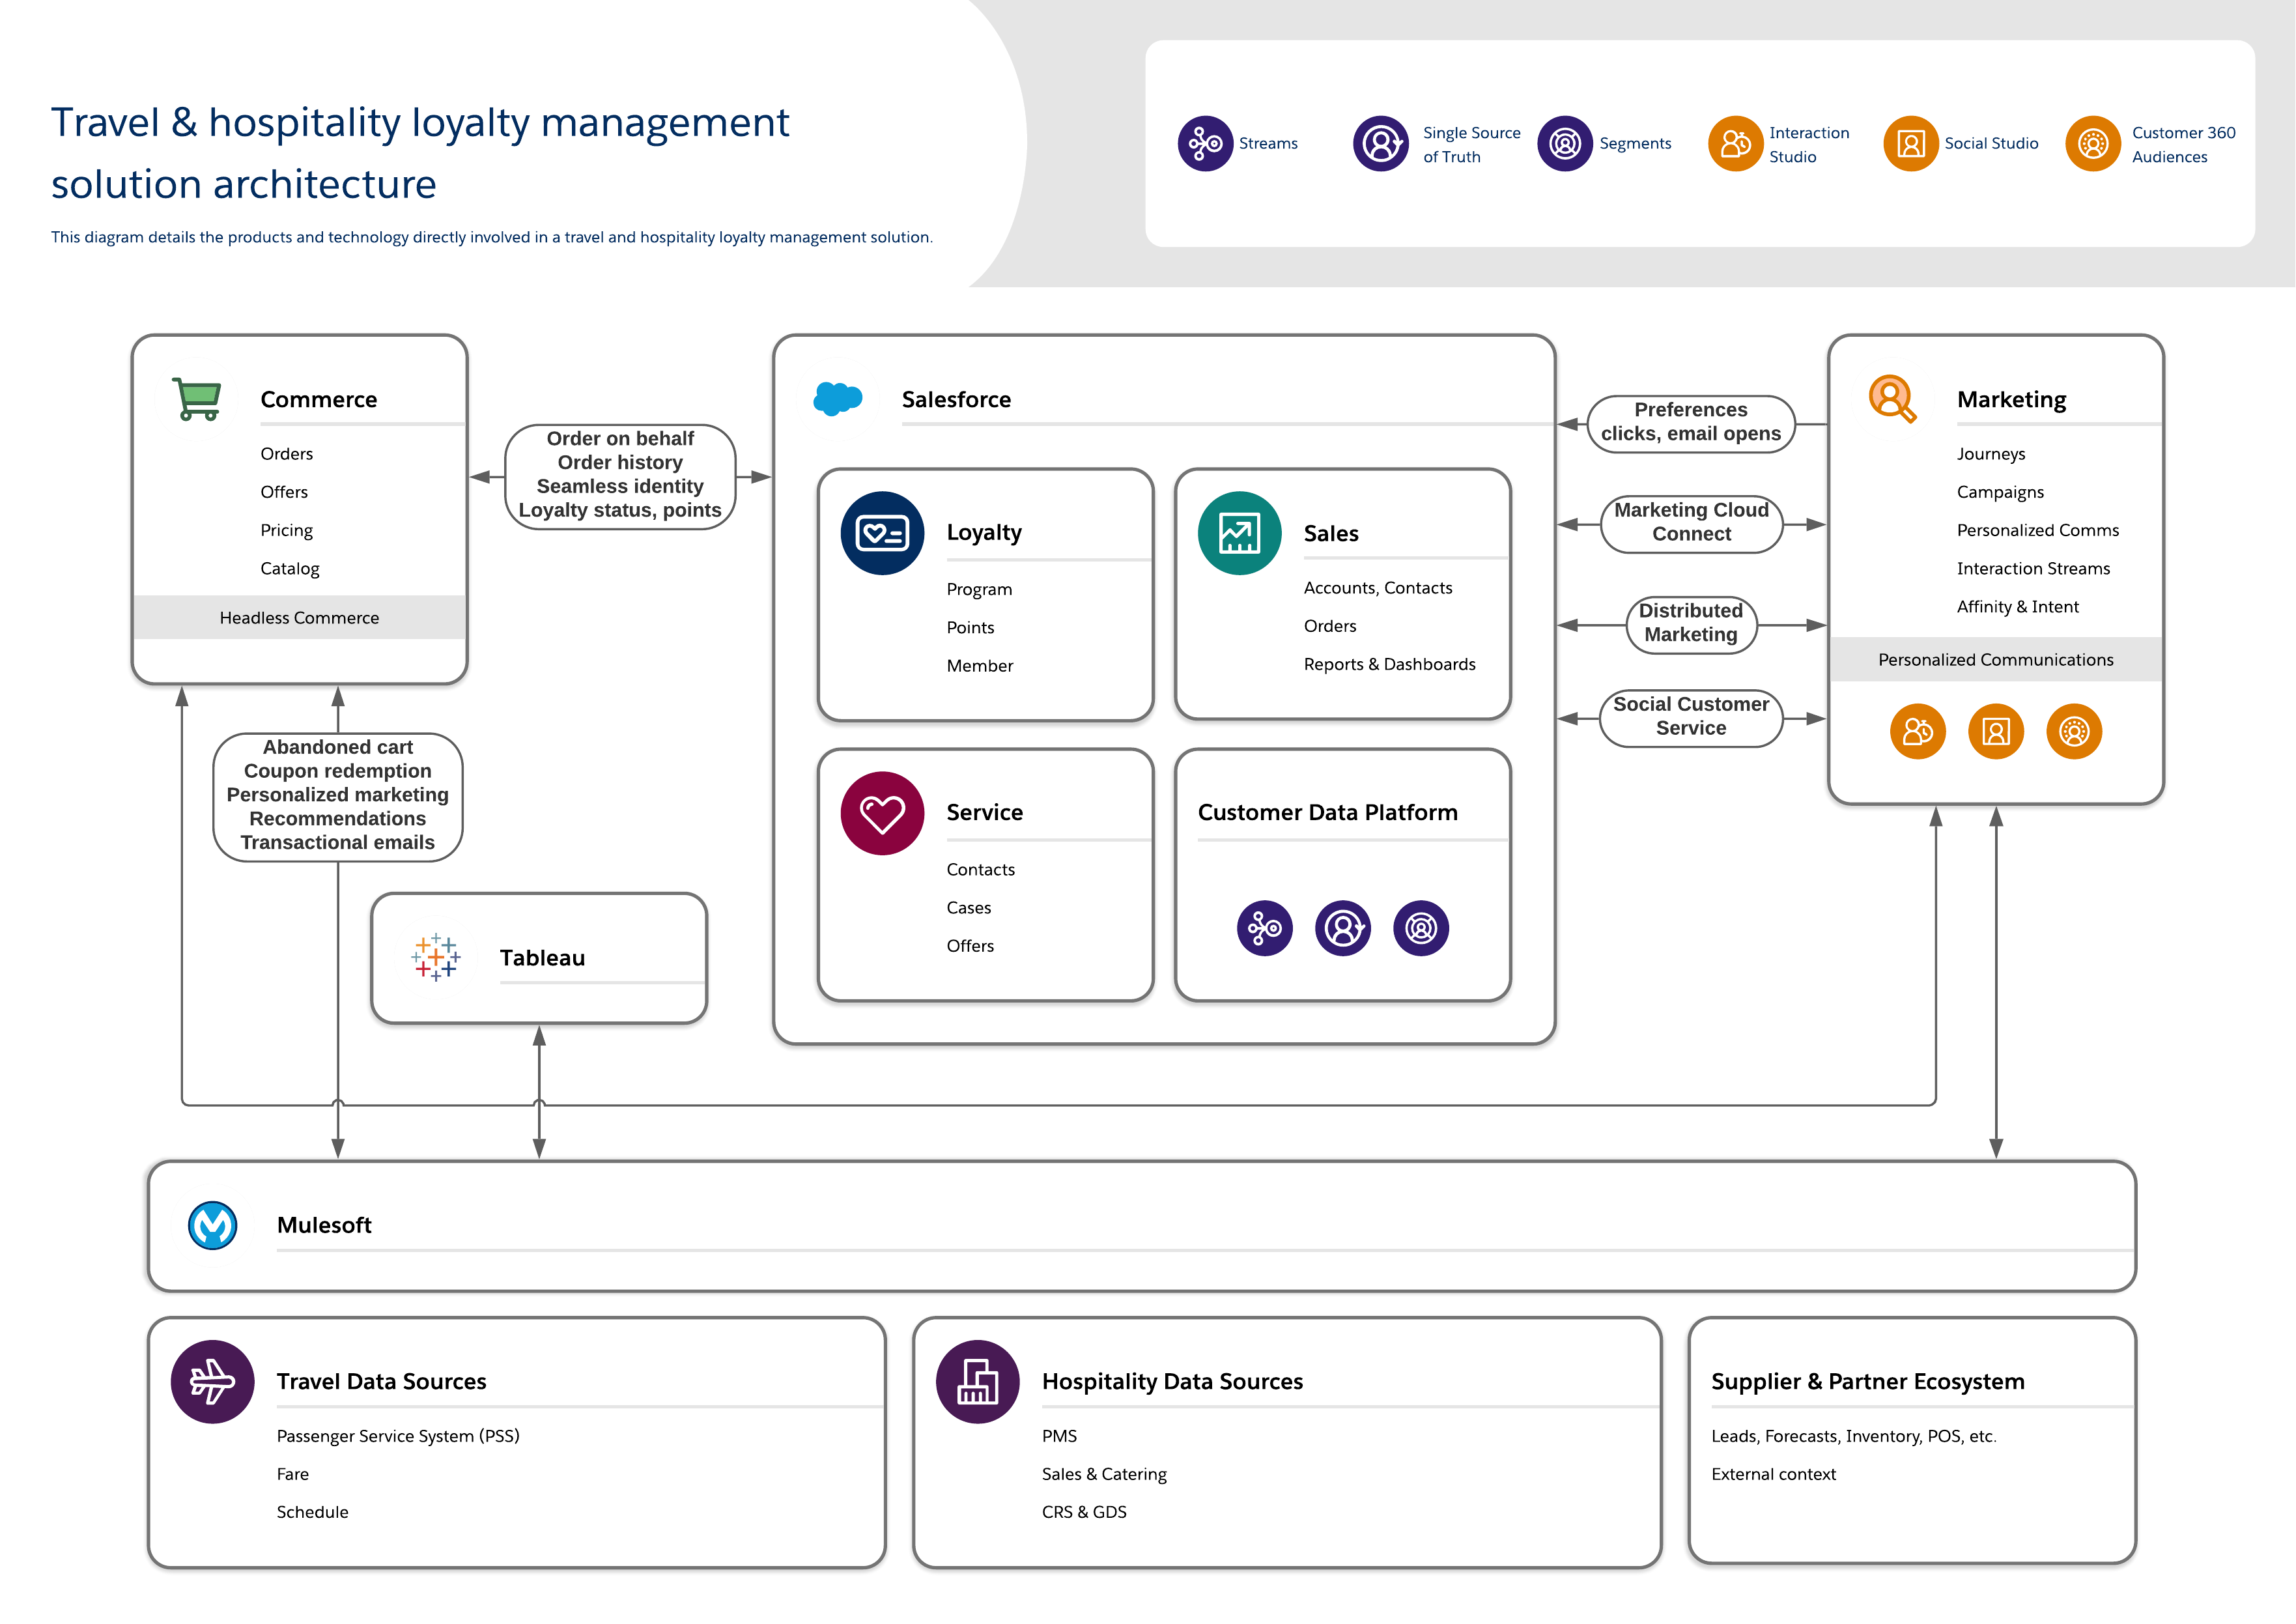 Travel & Hospitality Loyalty Management Solution Architecture